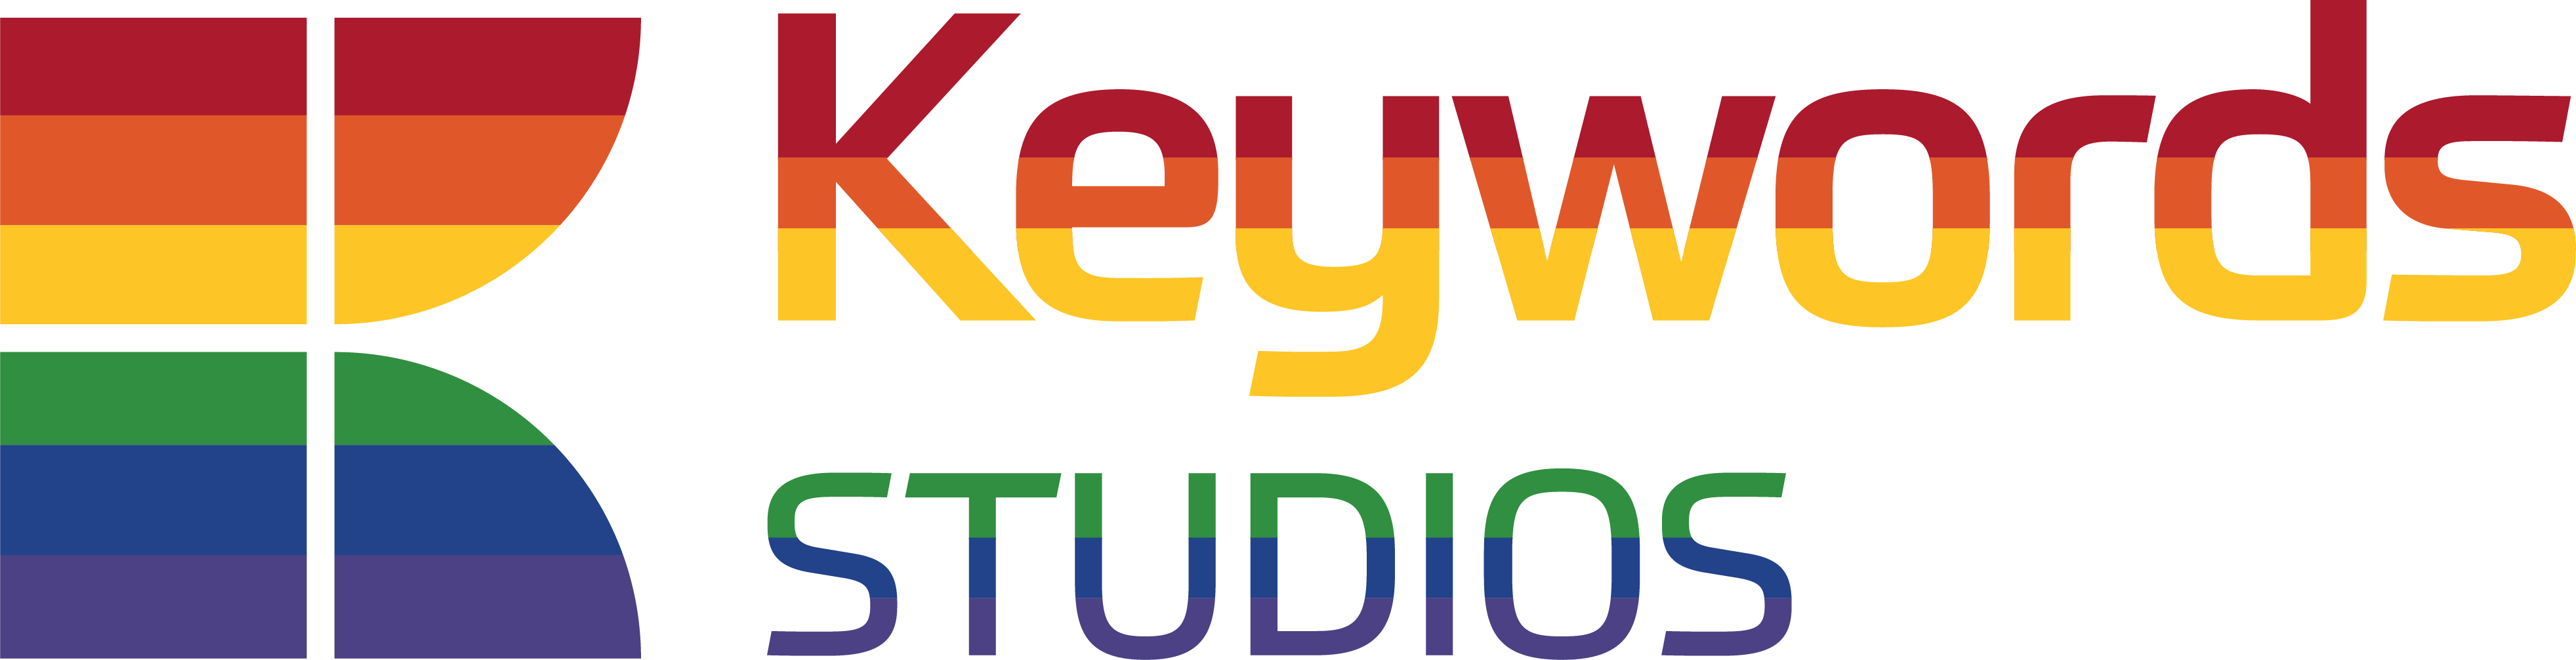 Game Development Services From Keywords Studios